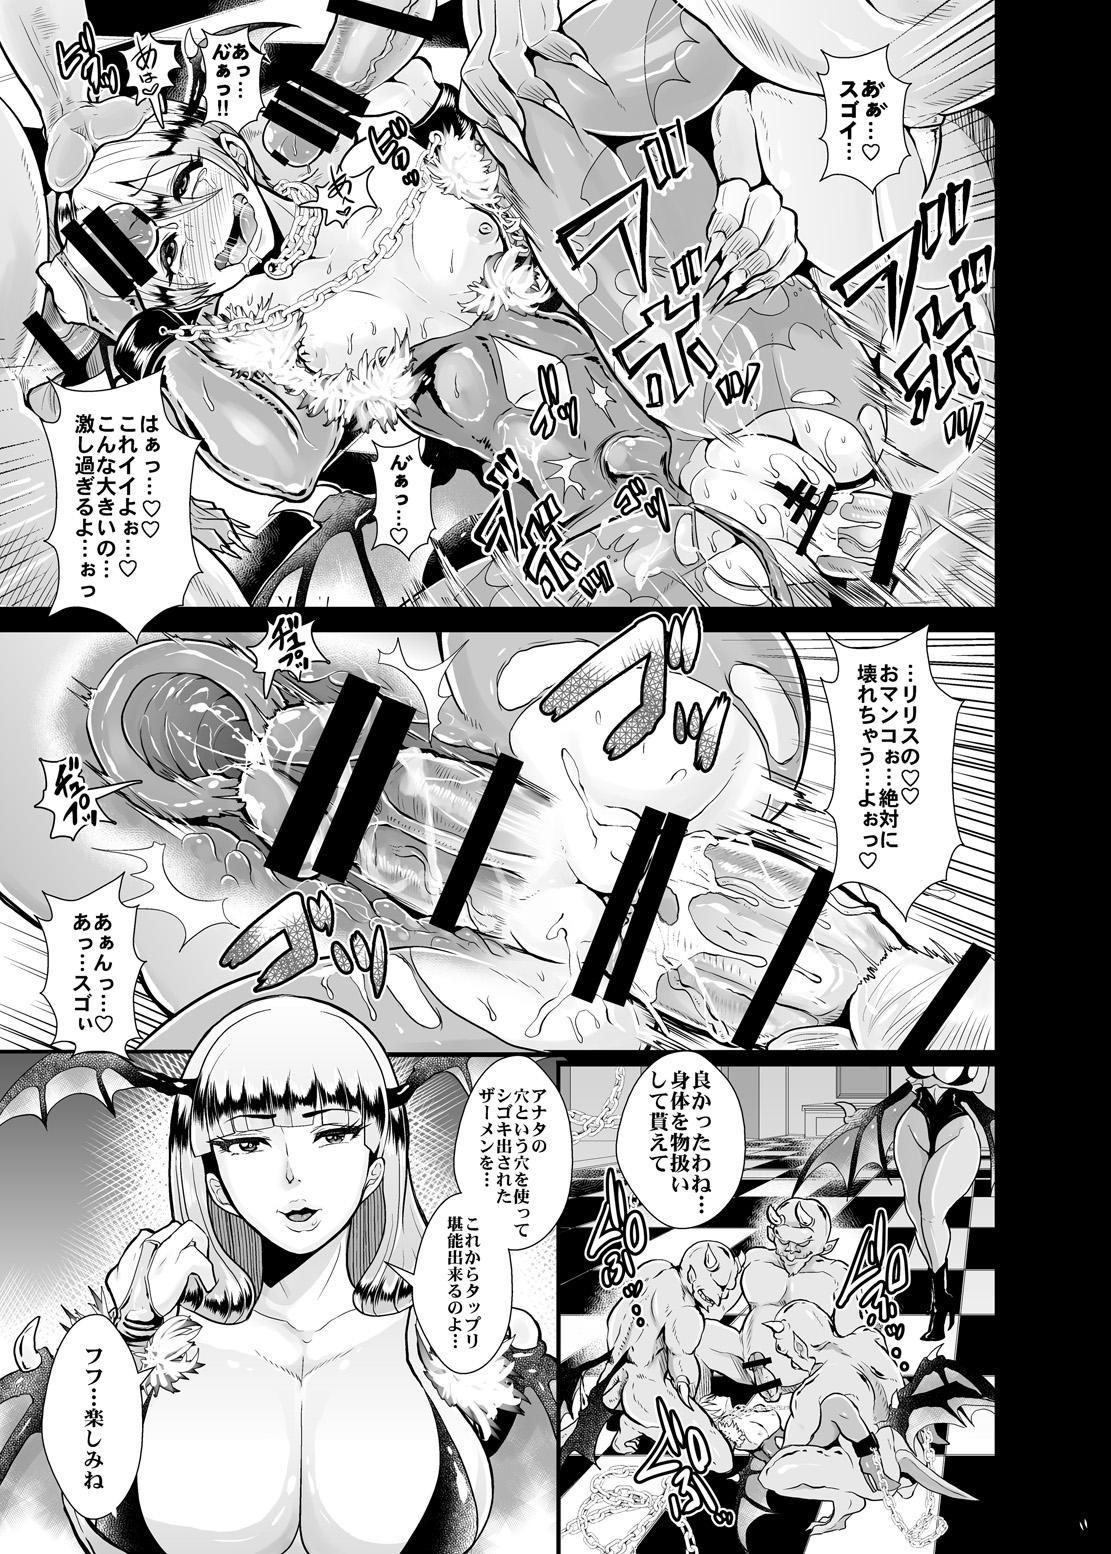 Cum Eating A lovely toy - Darkstalkers Women Sucking - Page 10